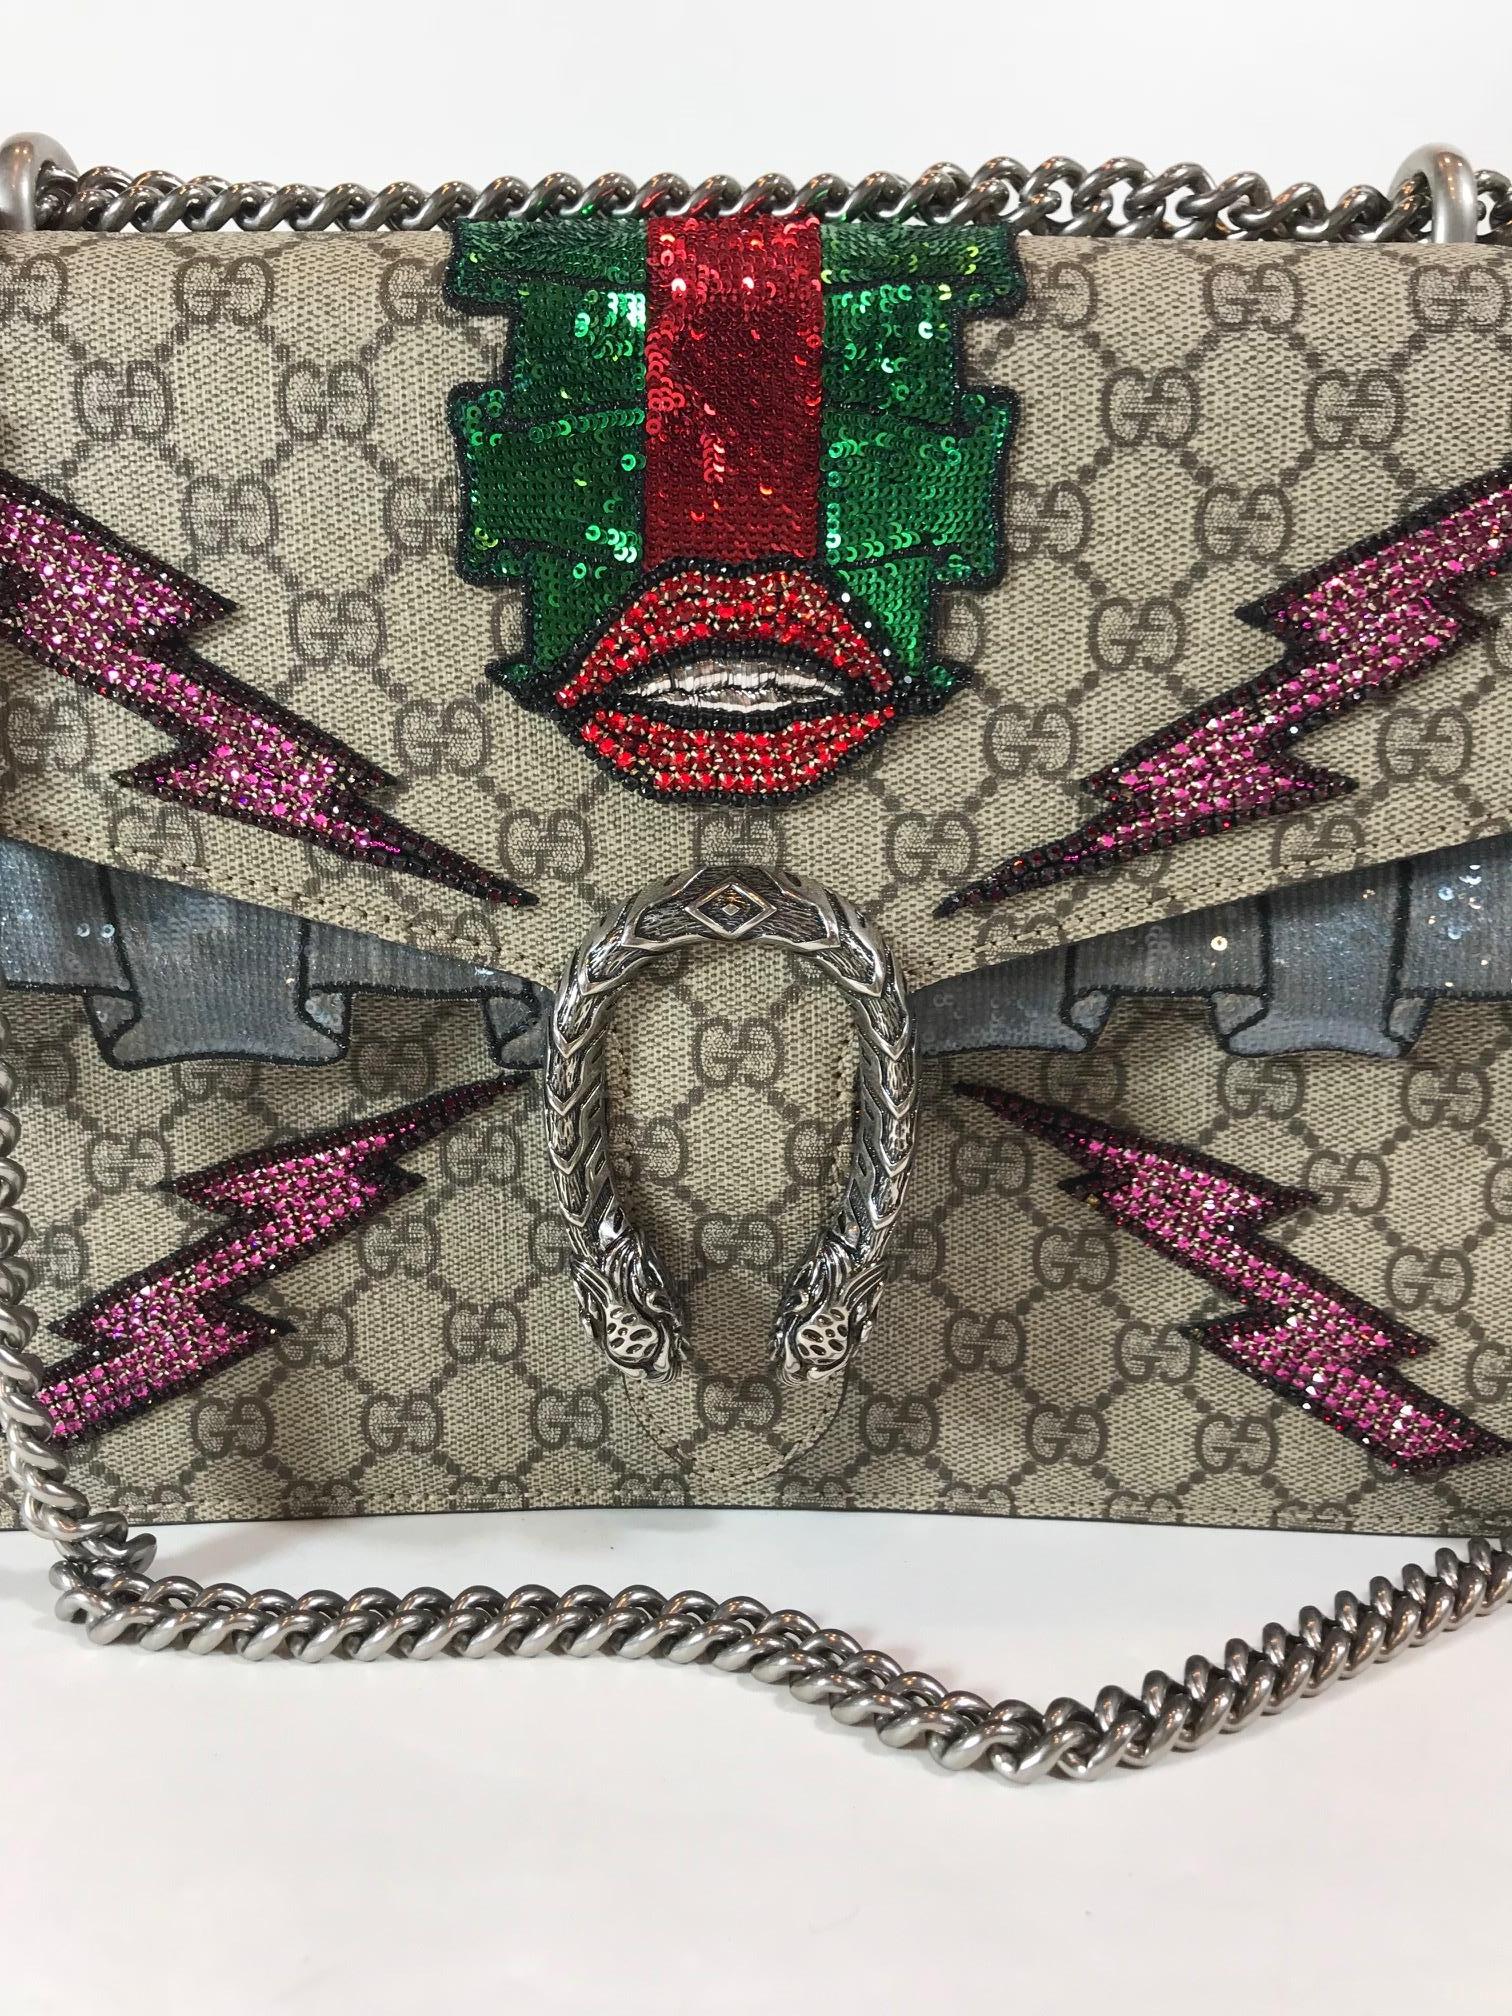 Gucci Embroidered GG Supreme Dionysus Bag In Excellent Condition For Sale In Roslyn, NY